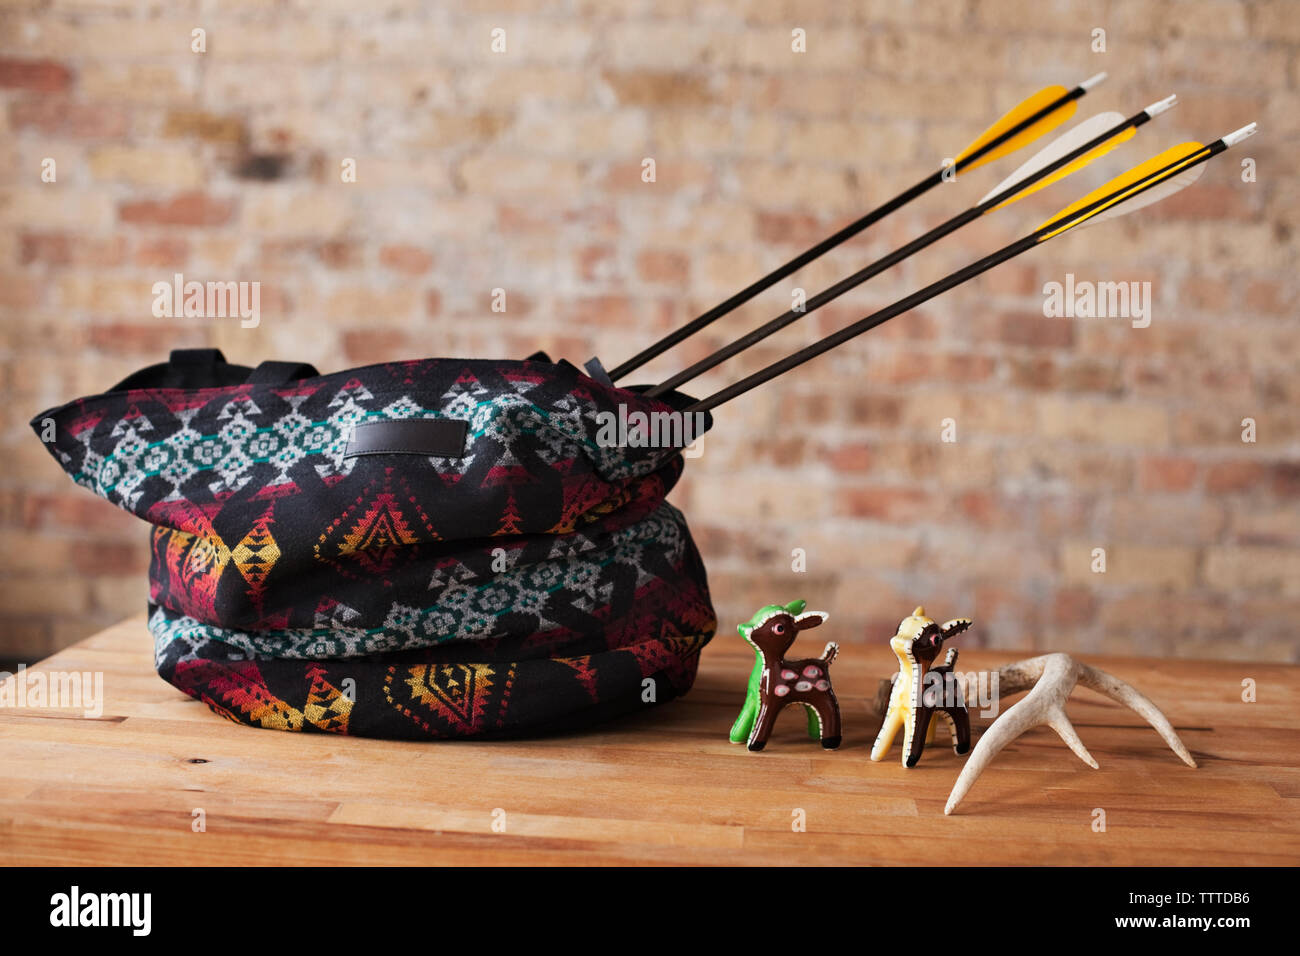 Arrows in bag with animal figurines on table Stock Photo